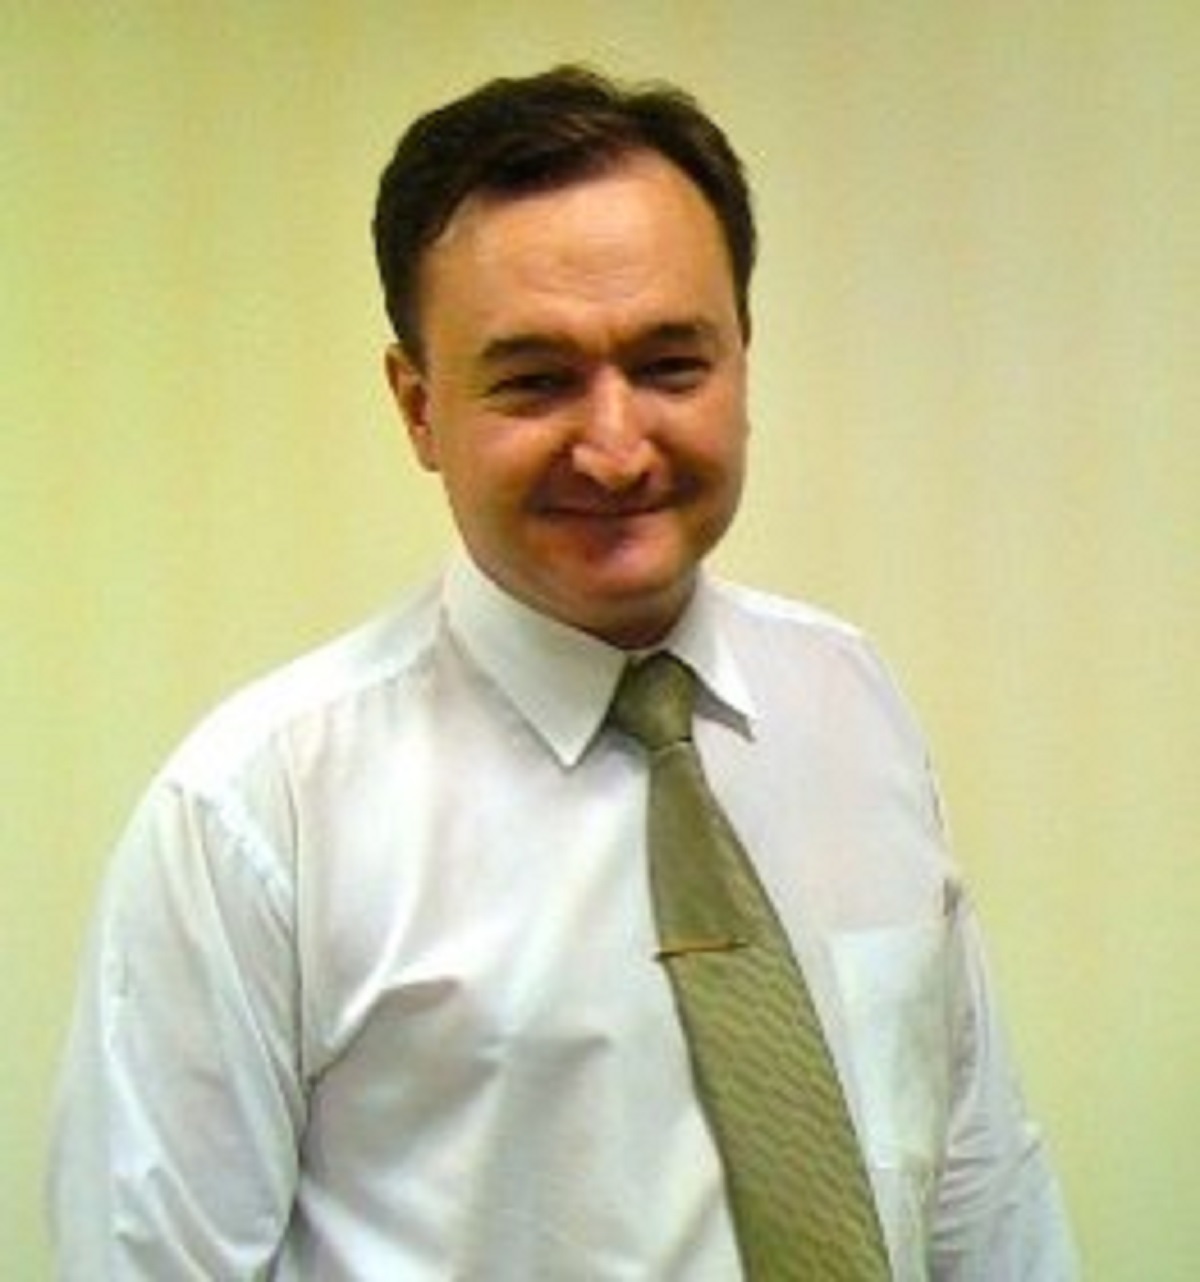 Sergei Magnitsky, whistleblower of corruption in the Russian government including human rights violations and strong opponent of Vladimir Putin. While in prison he died one week before his court date to testify from what was originally deemed malnourishment and an untreated heart condition with medical neglect. An investigation later found that he had been severely assaulted shortly before his death.